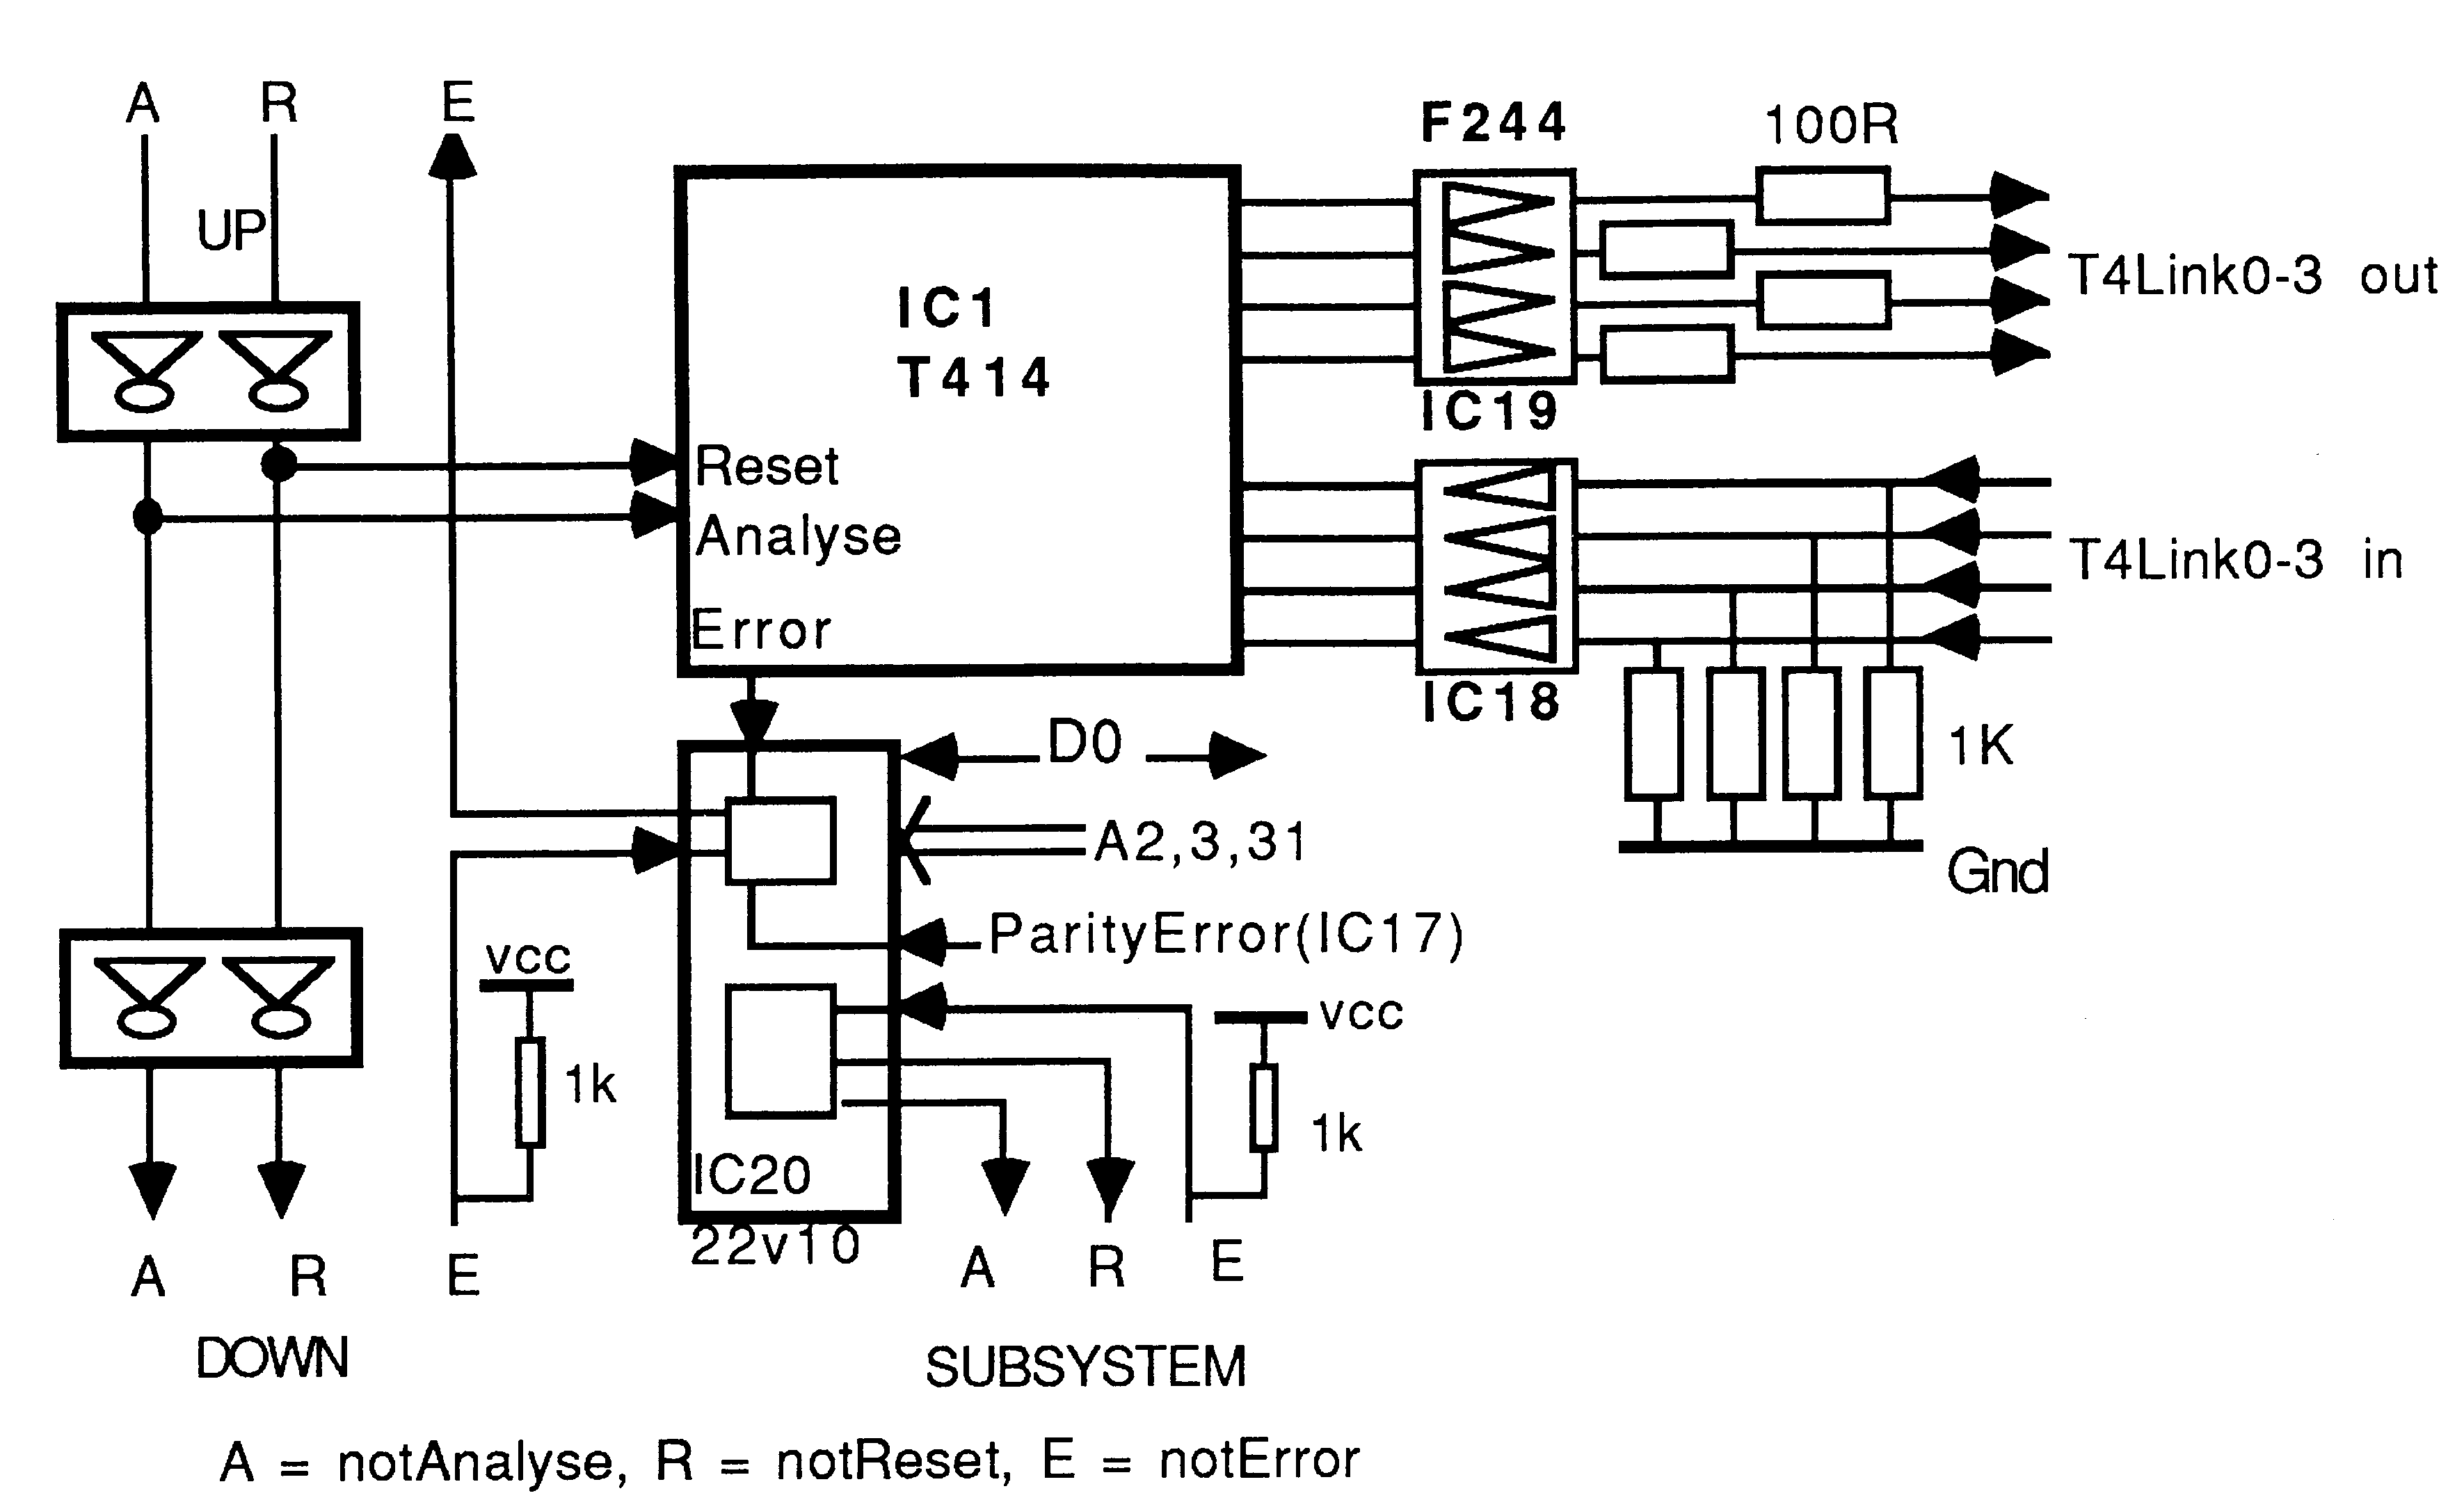 Up, down, subsystem schematic